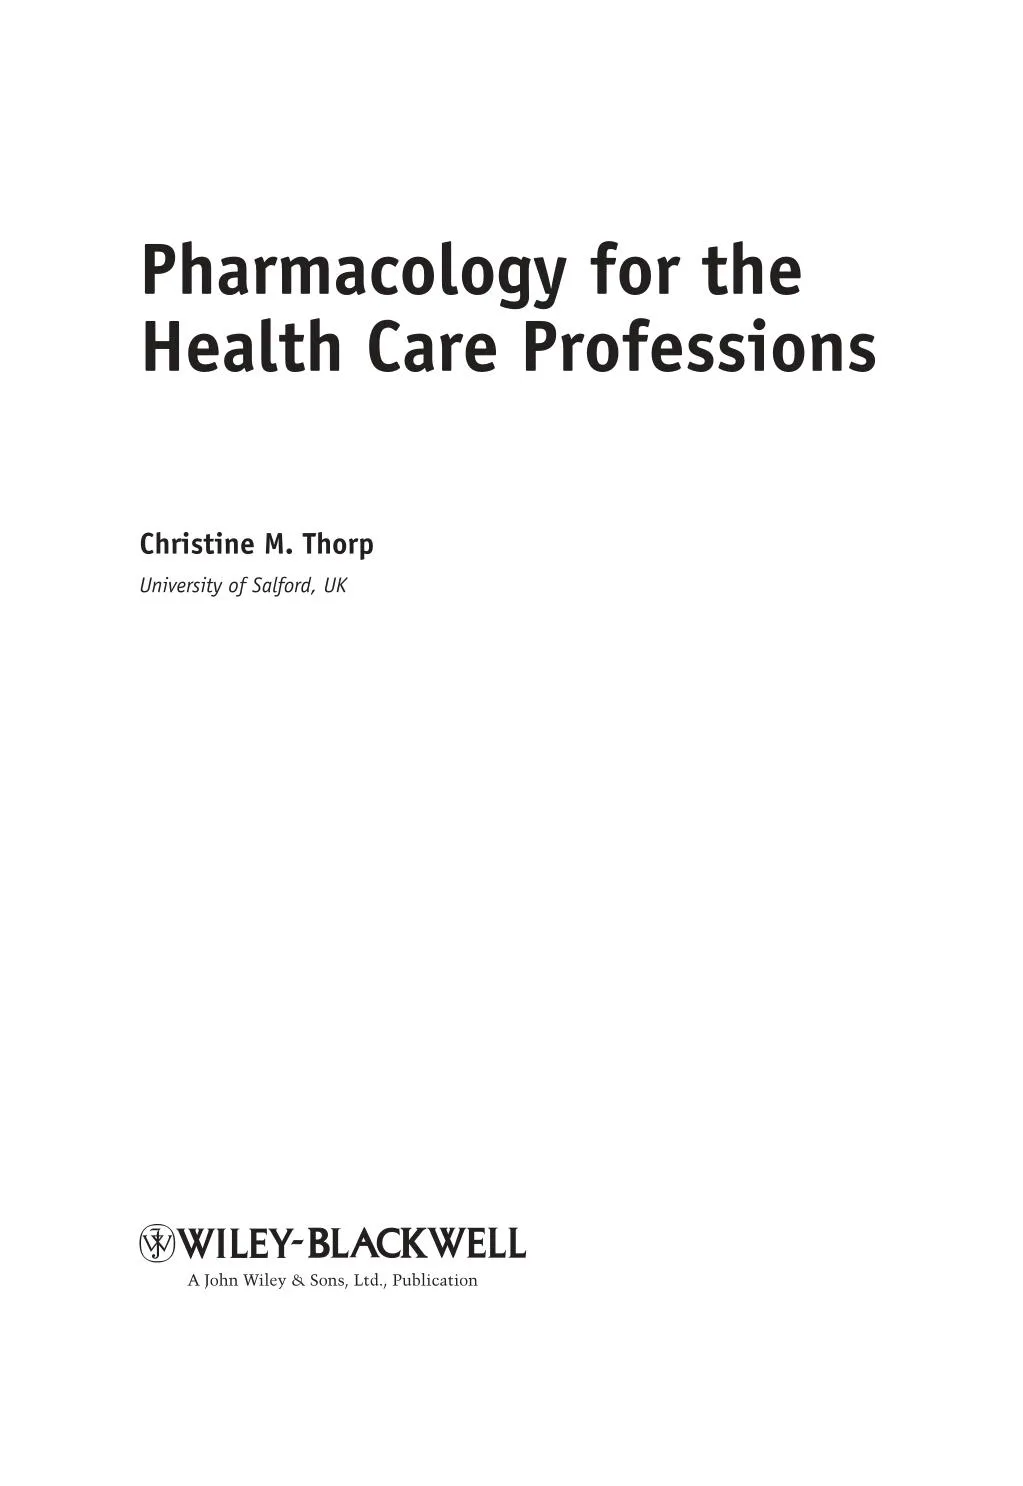 pharmacology for the health care professions